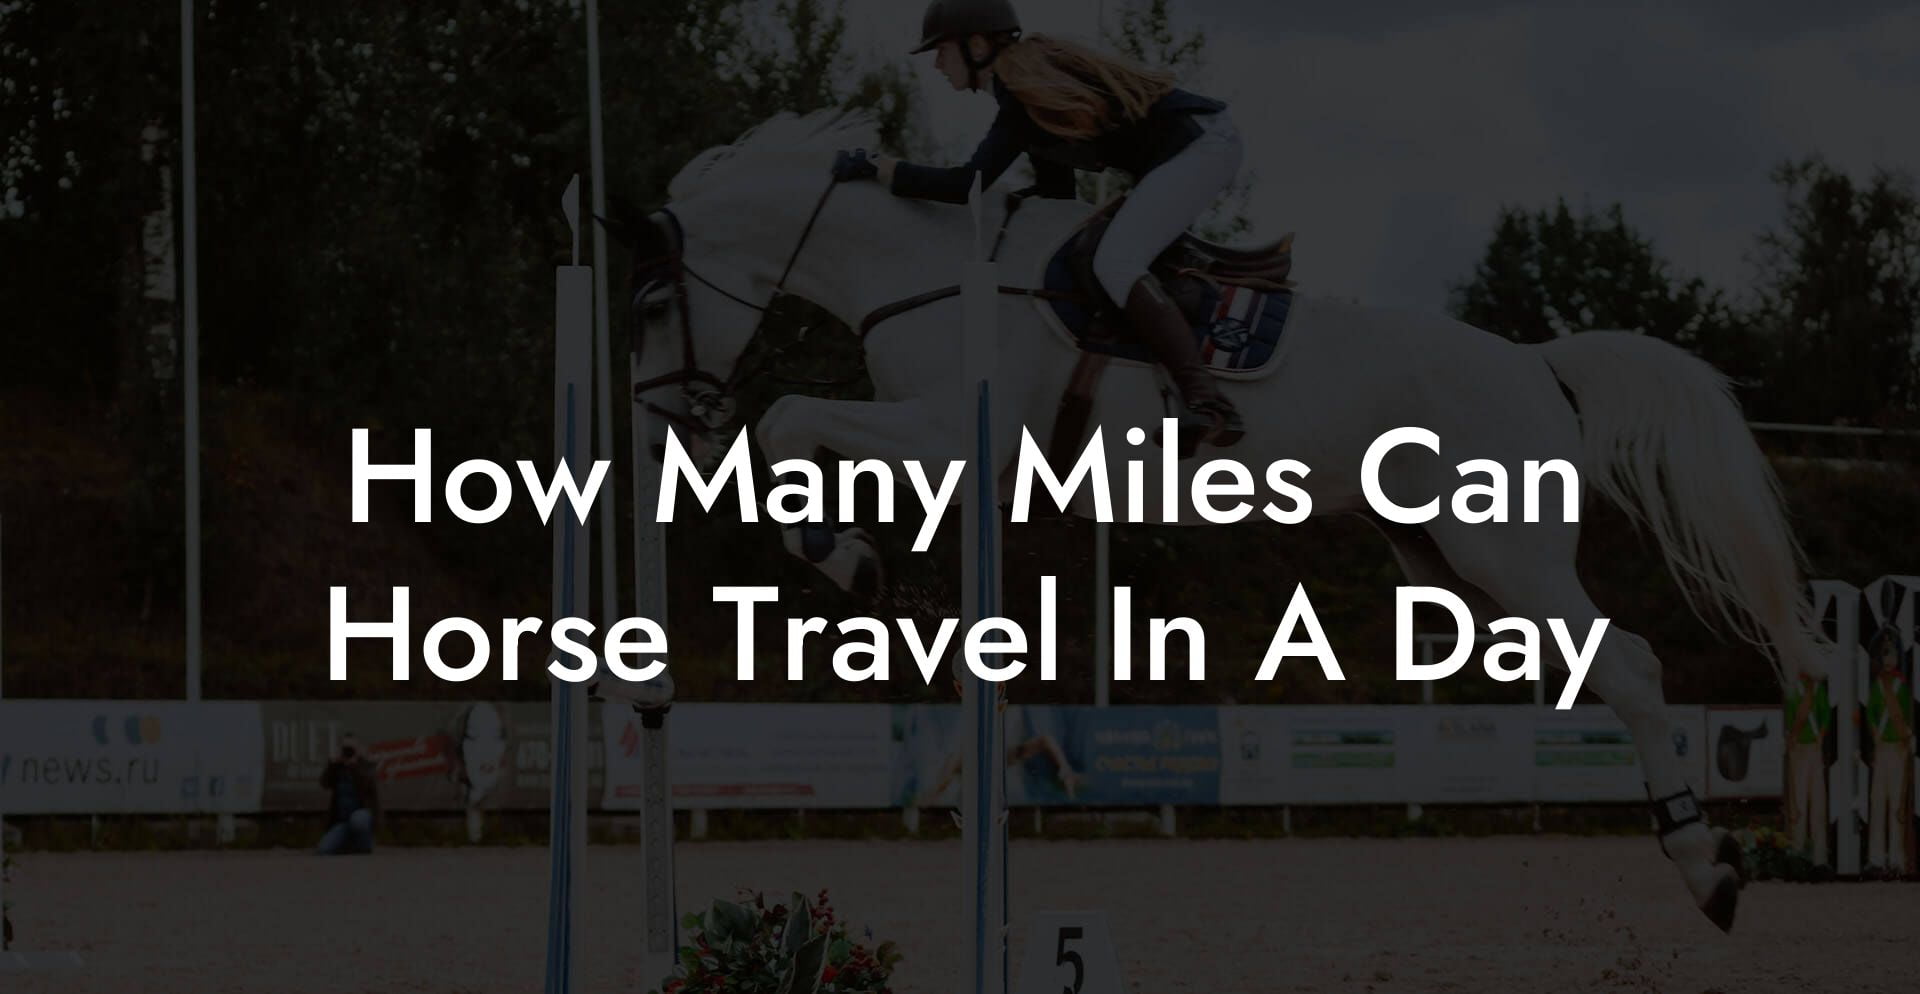 How Many Miles Can Horse Travel In A Day